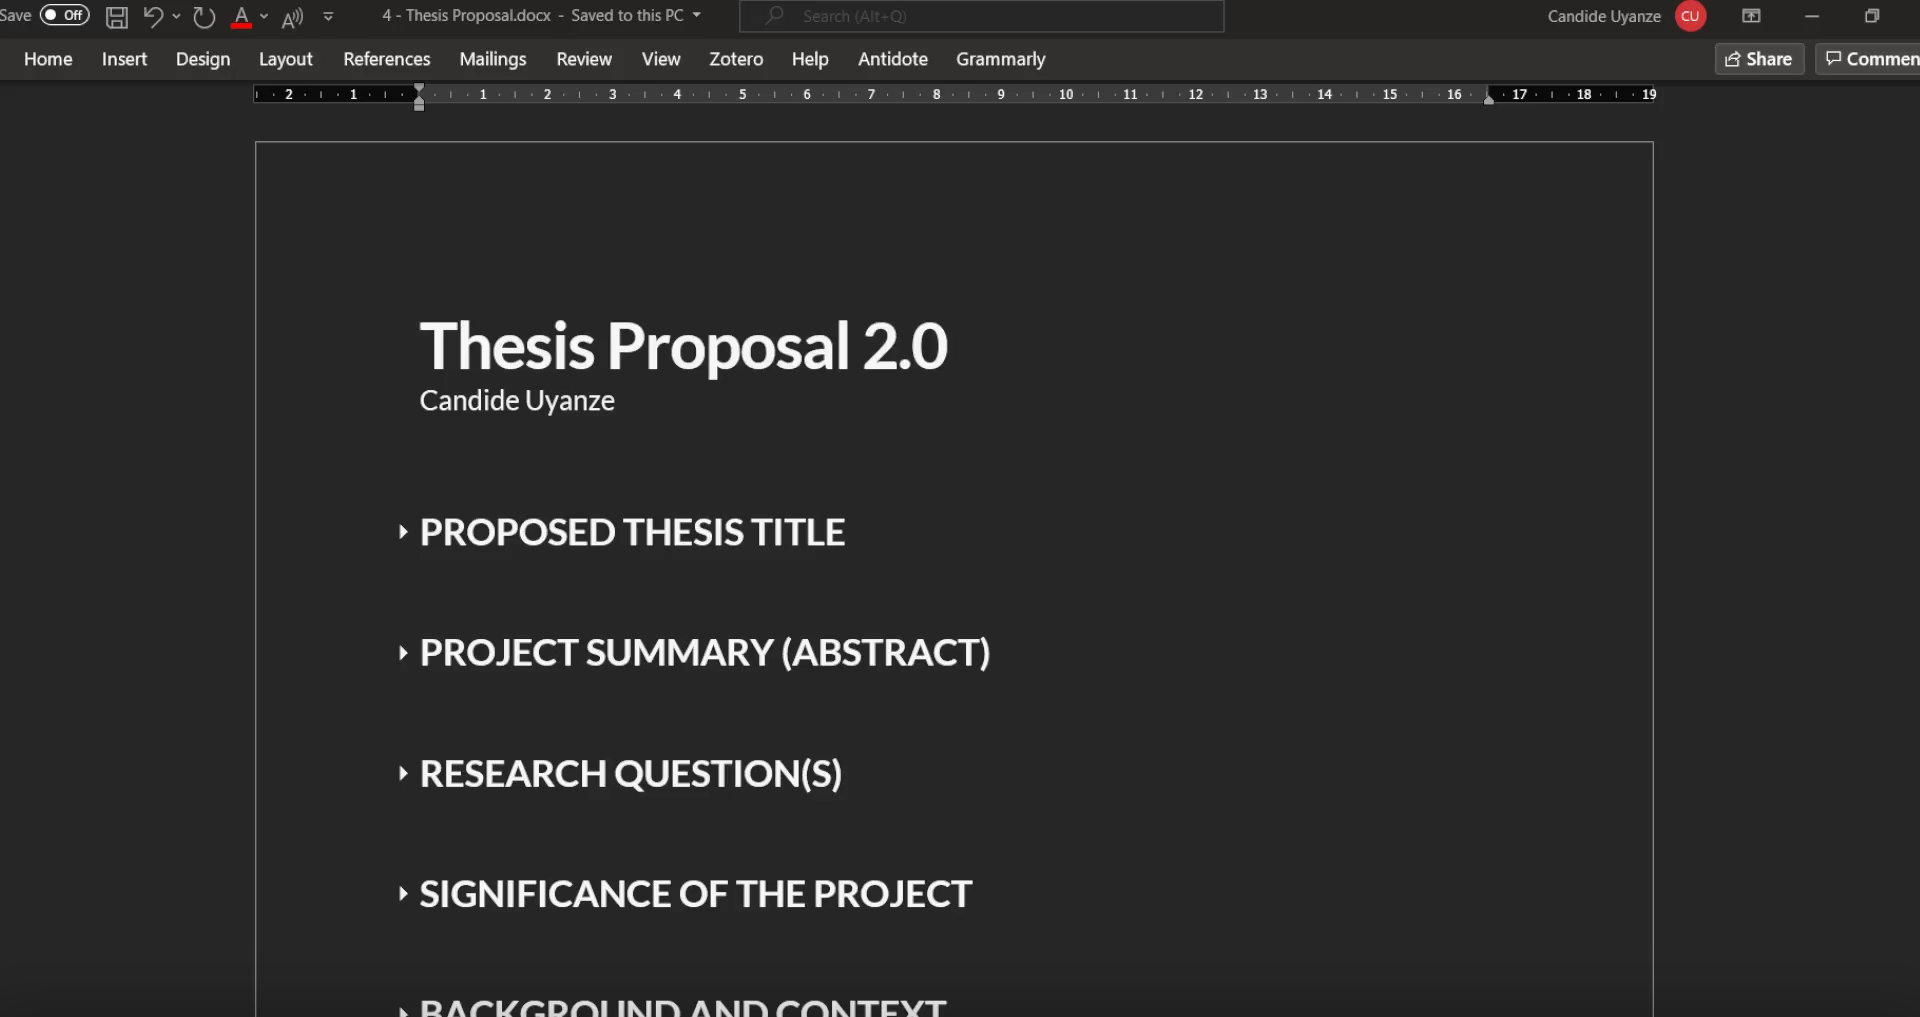 Thesis Proposal 2.0 Word Document